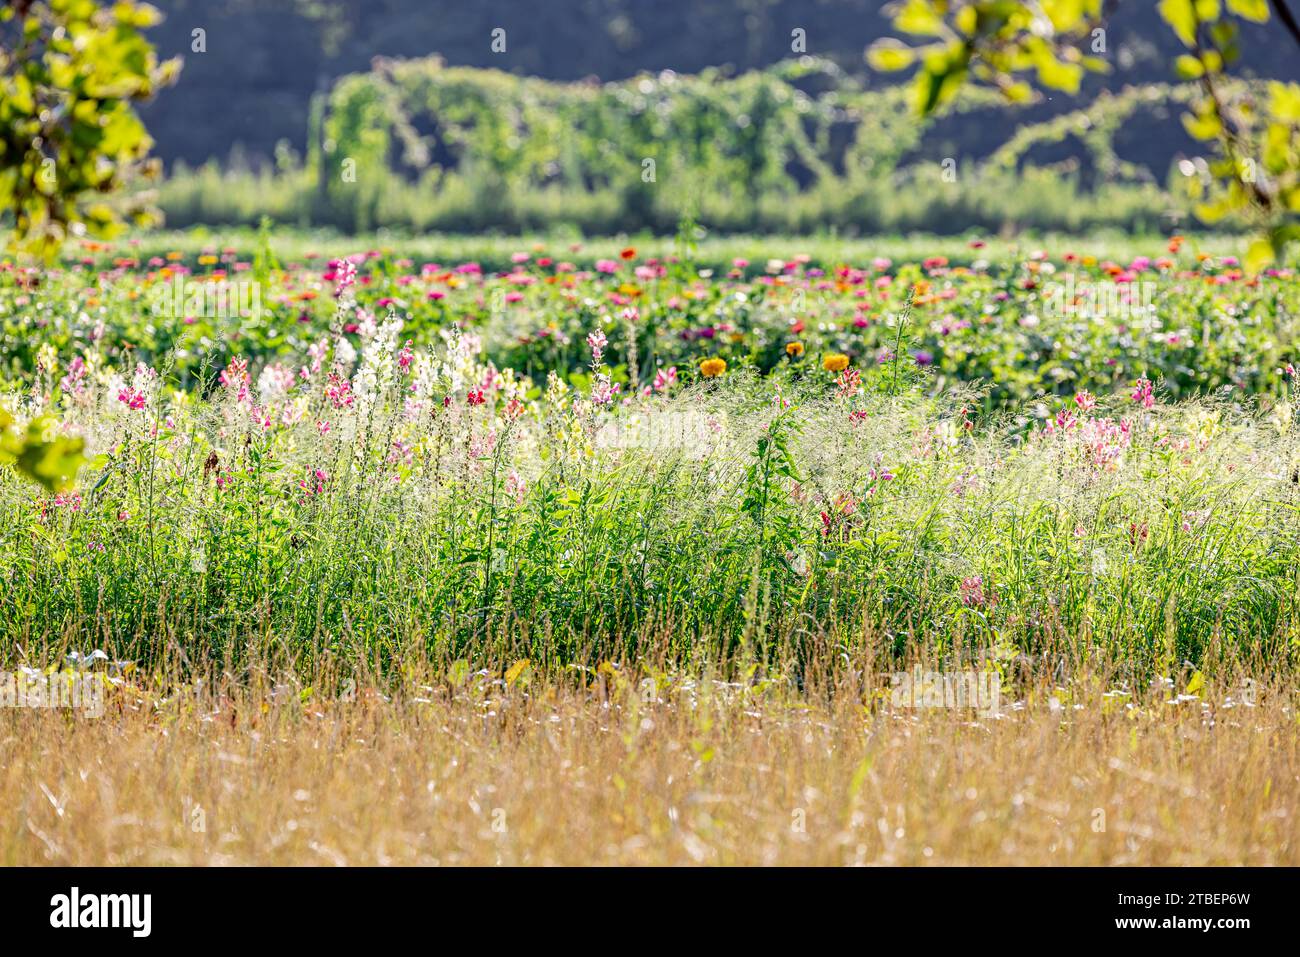 sagaponack landscape of field with blooming flowers Stock Photo